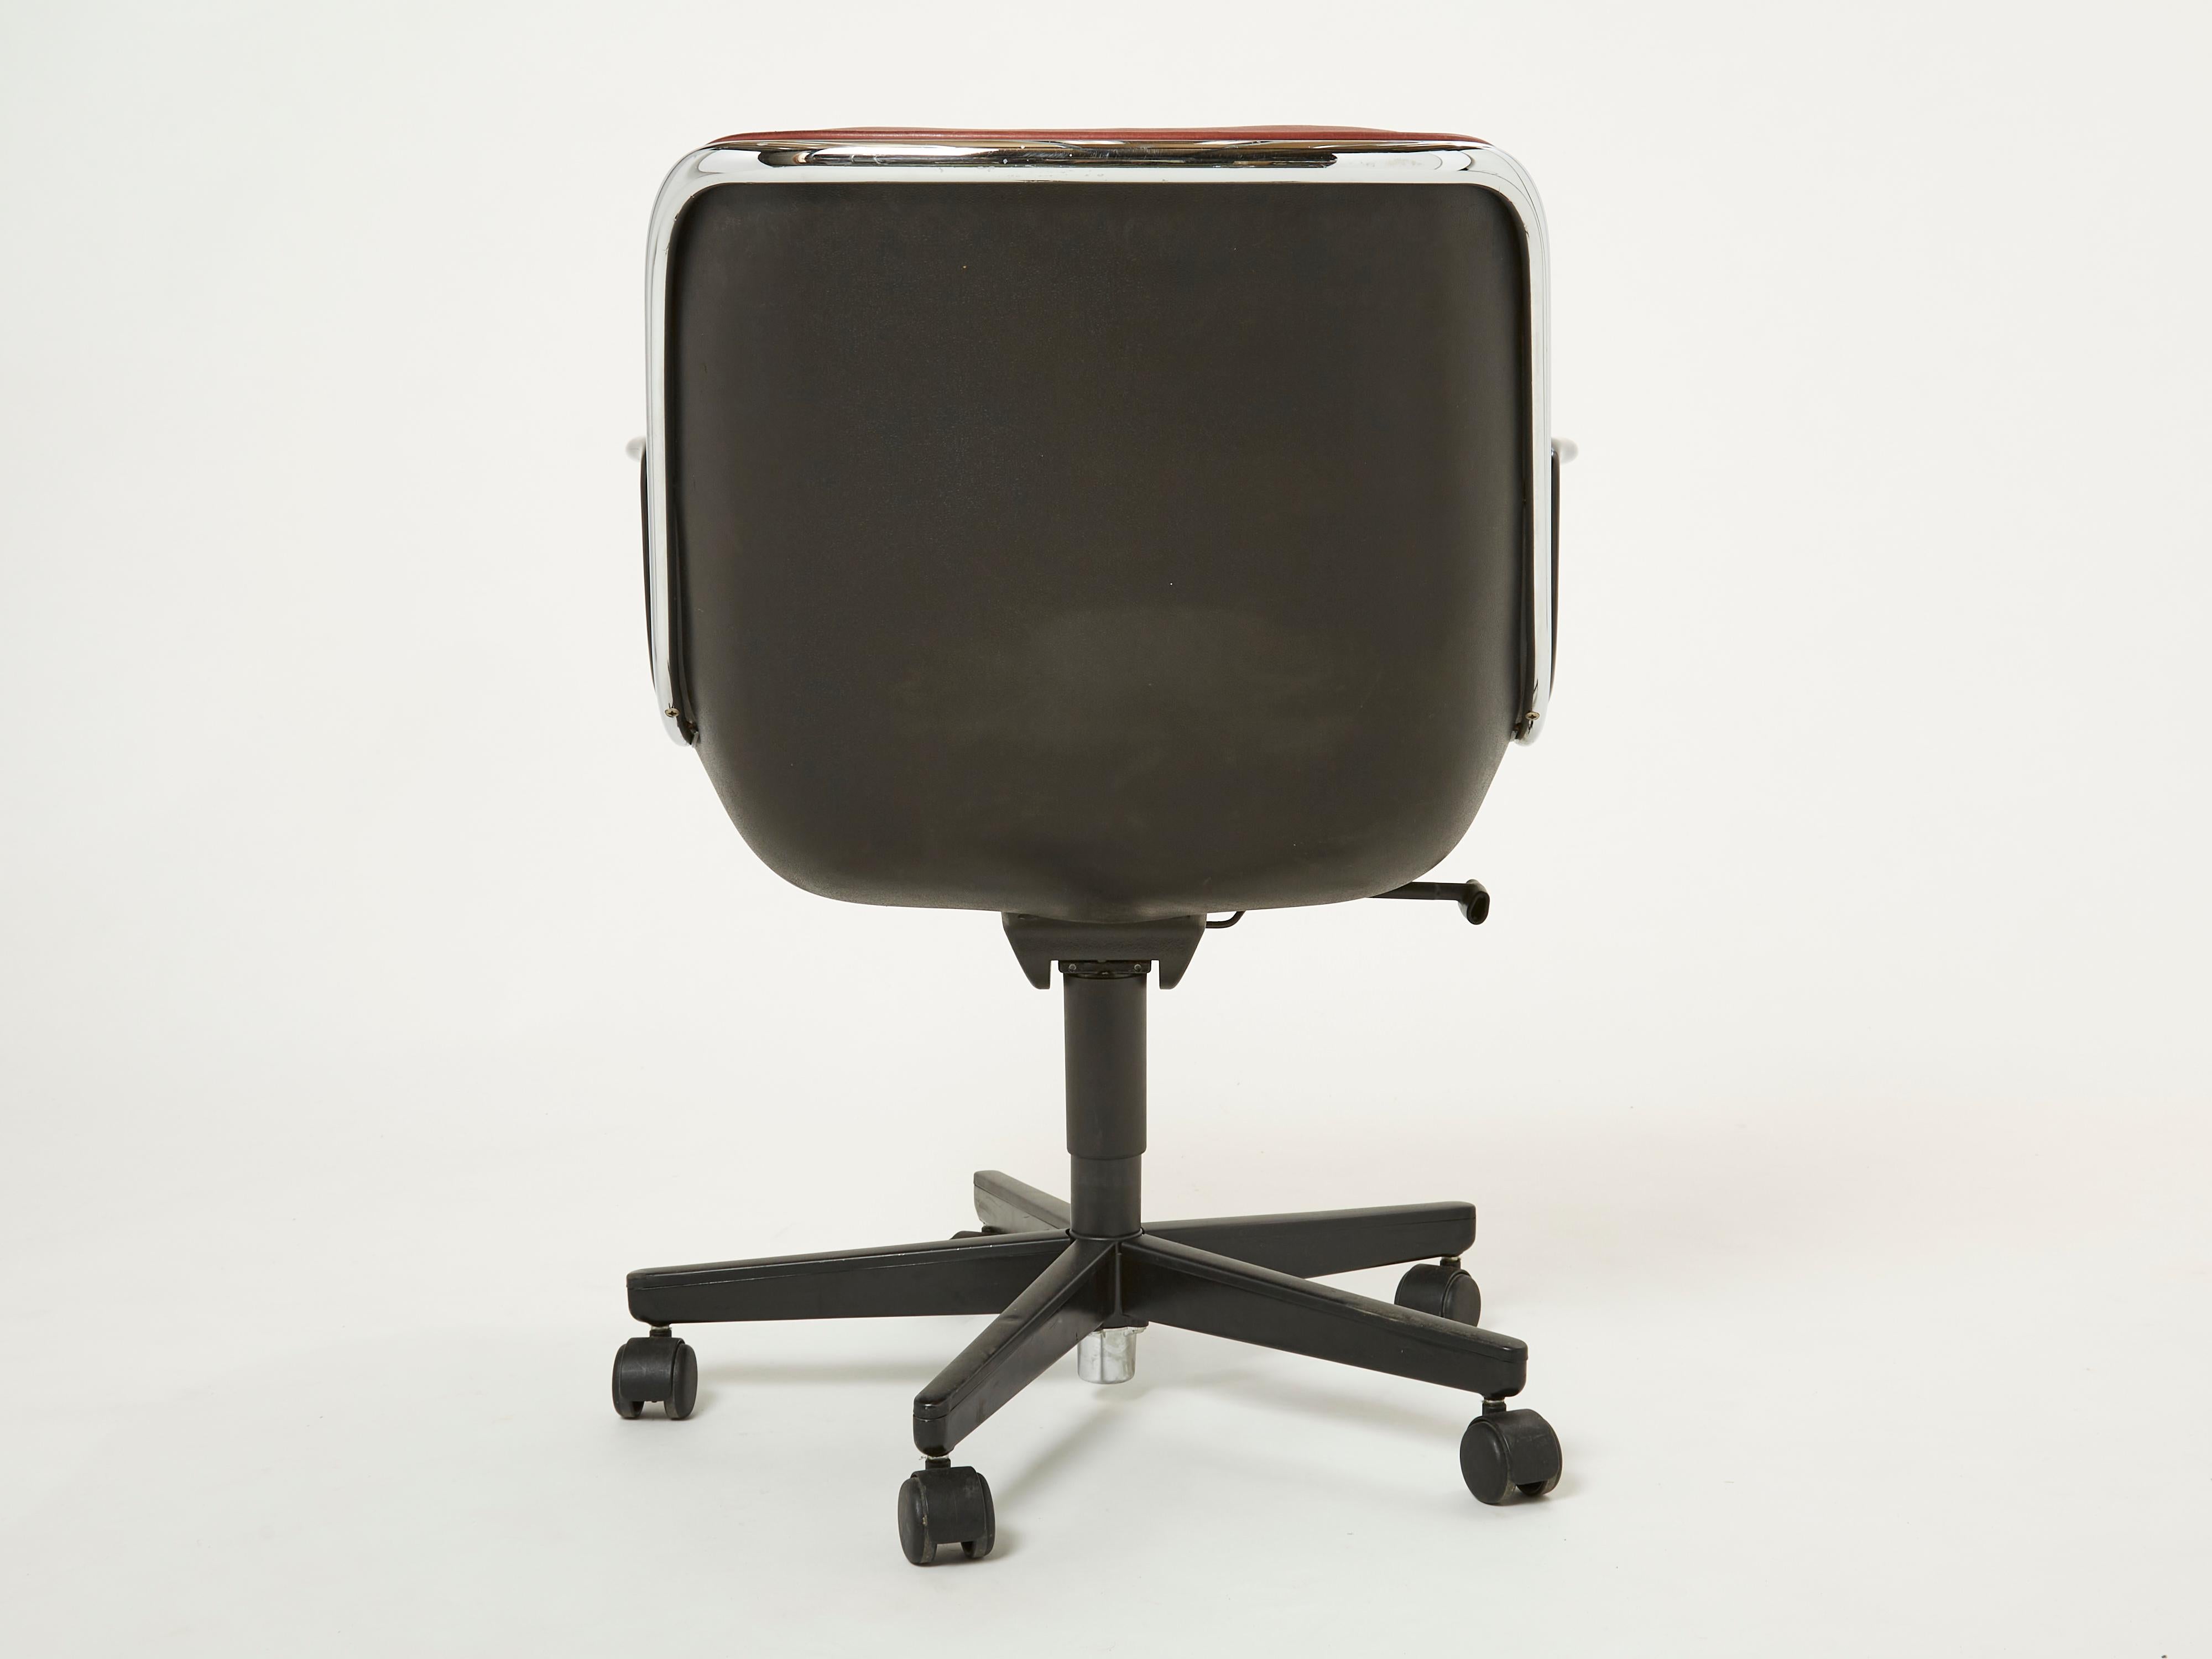 Late 20th Century Charles Pollock Executive Desk Chair for Knoll in brown Leather 1990